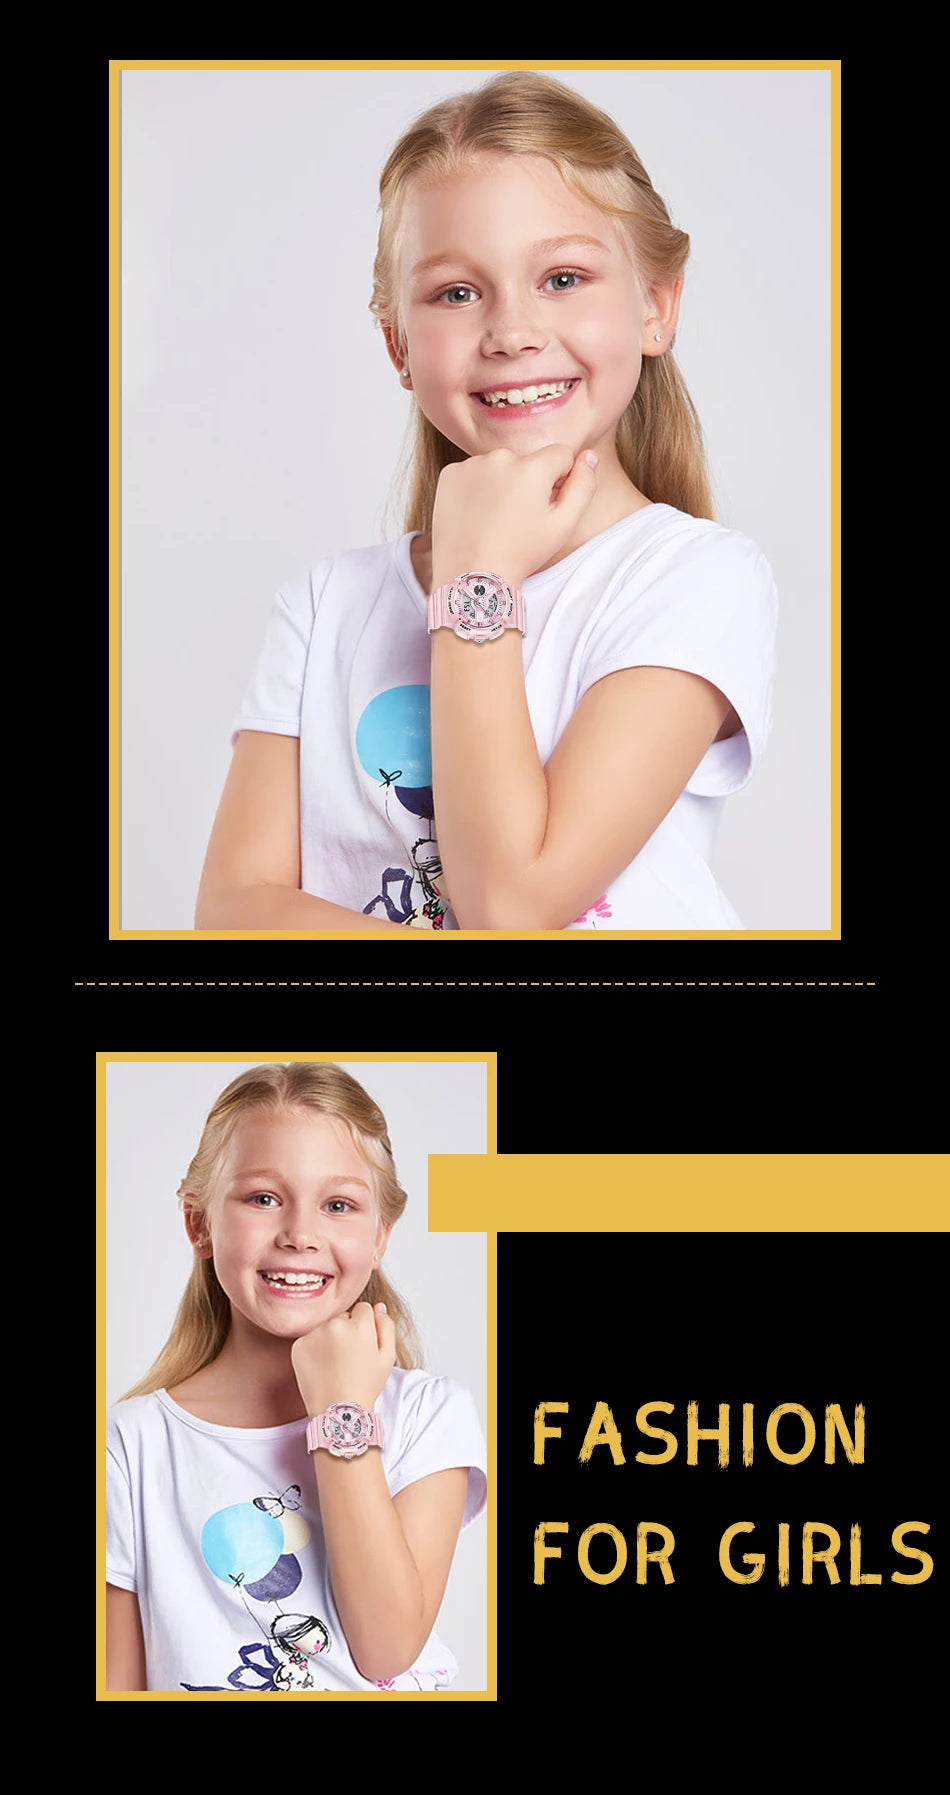 Dive into Adventure: High Quality Electronic Sports Digital Watch for Boys and Girls – Unleash the Thrill of Timekeeping with Style!